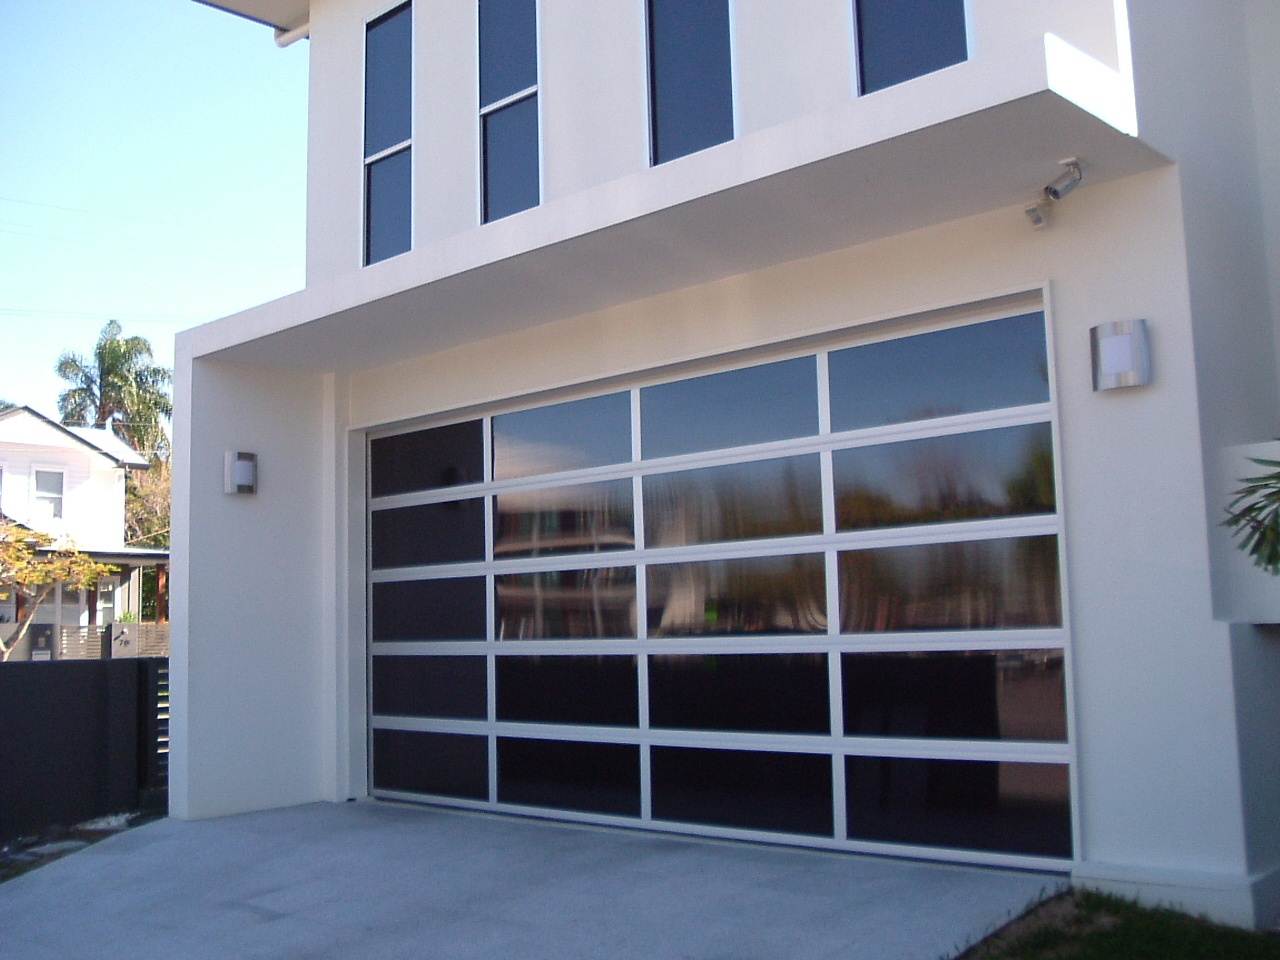 Best Garage Glasses With Aluminium Door Ideas For Modern Home Architecture With Best White Wall Floor And Inspiring Style For Amazing Home Concept Ideas